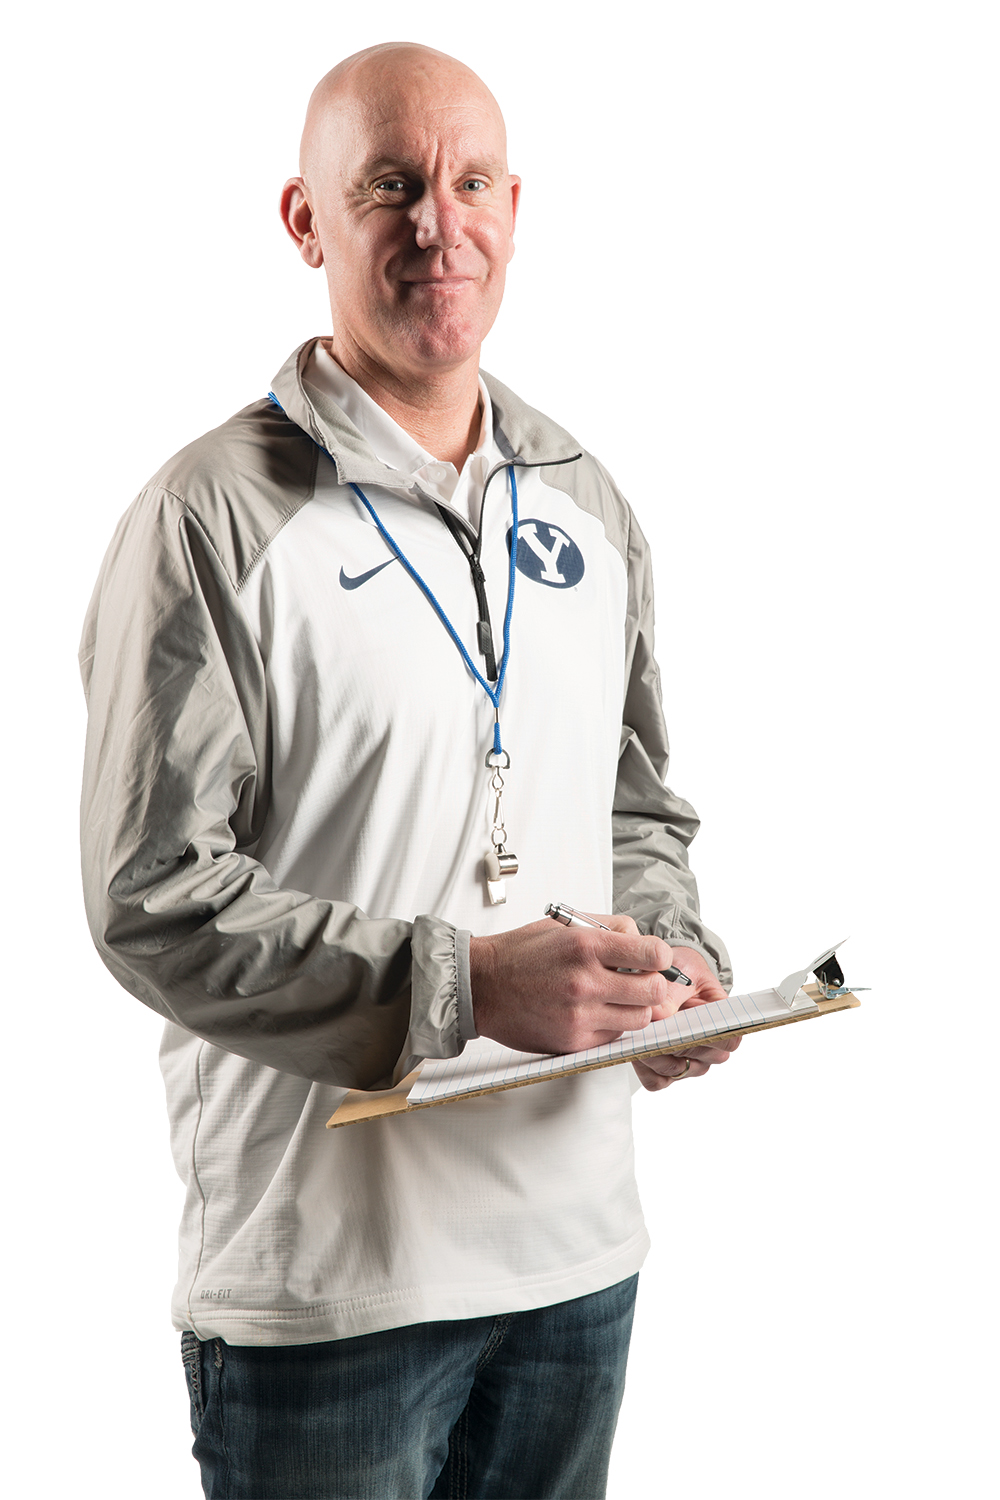 Craig Manning wearing BYU athletic gear and holding a clipboard with a pen.